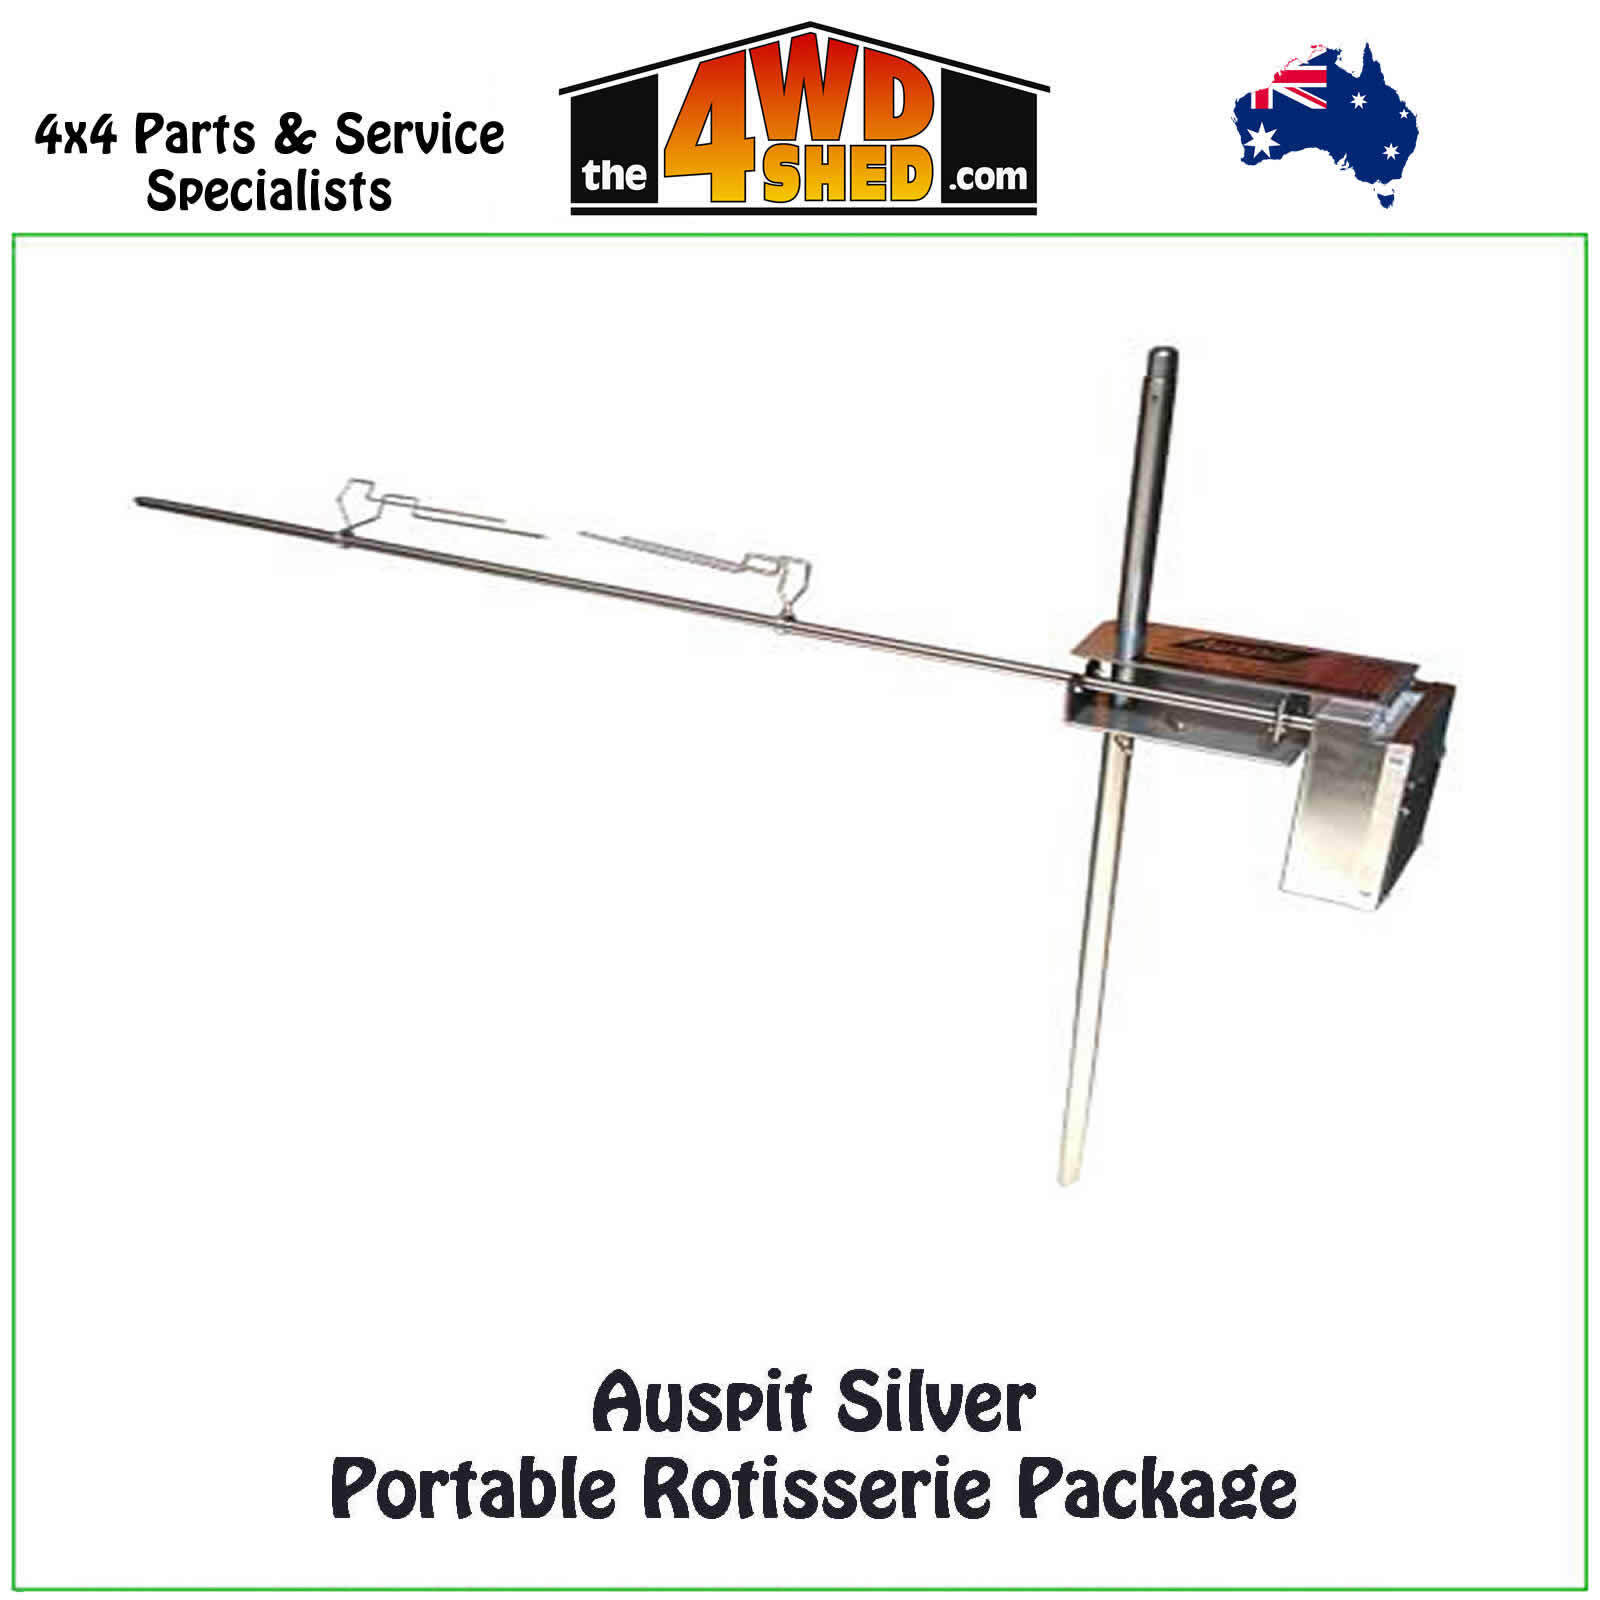 <span style="font-size: 18px;">Auspit Silver Portable Rotisserie Package</span>